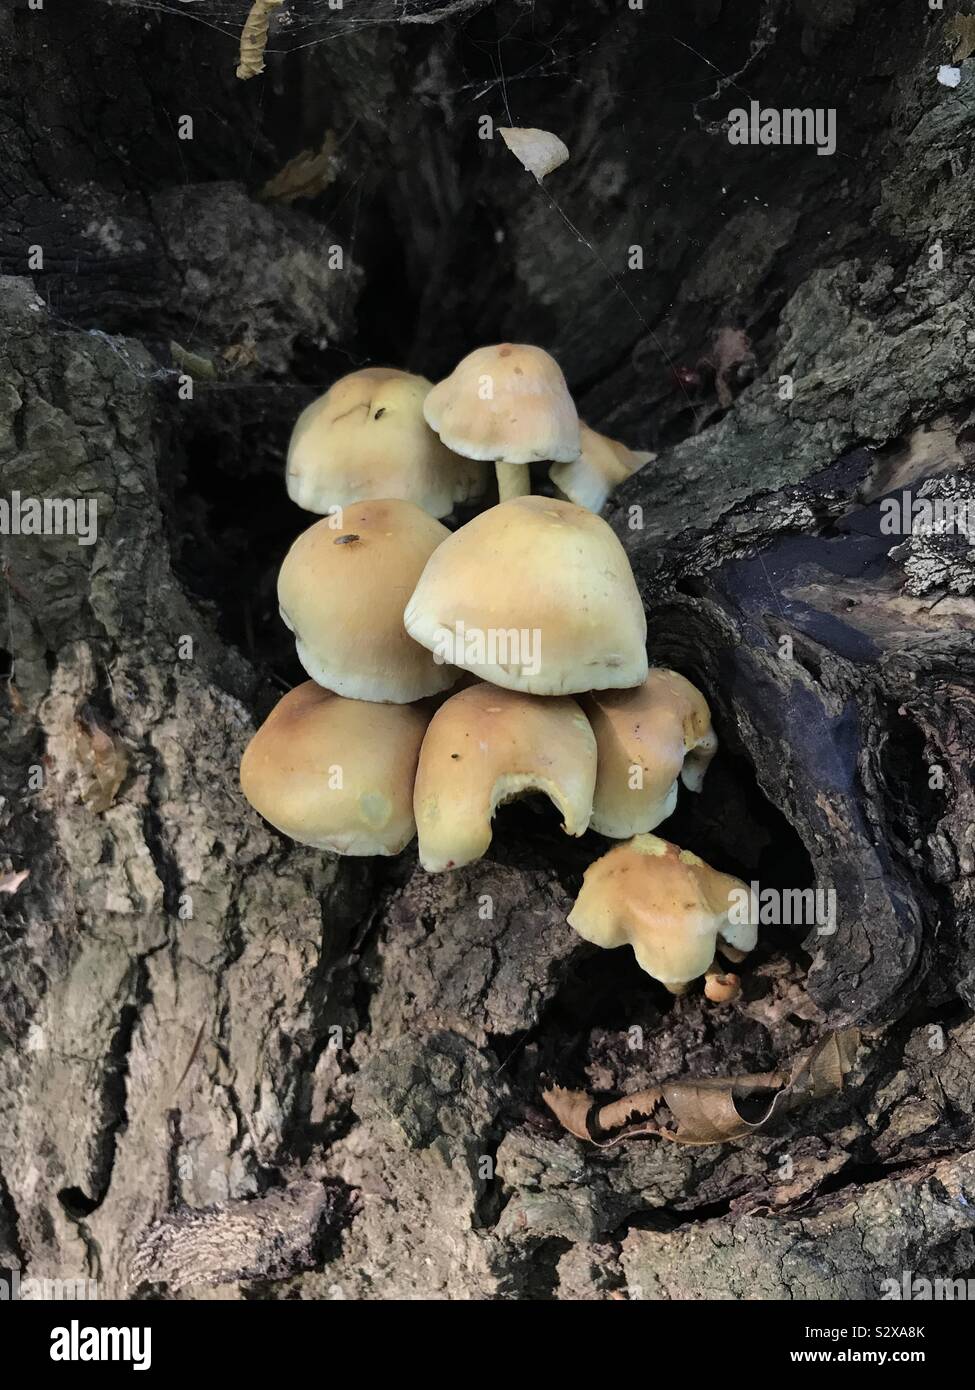 Fungus growing out of tree stump Stock Photo